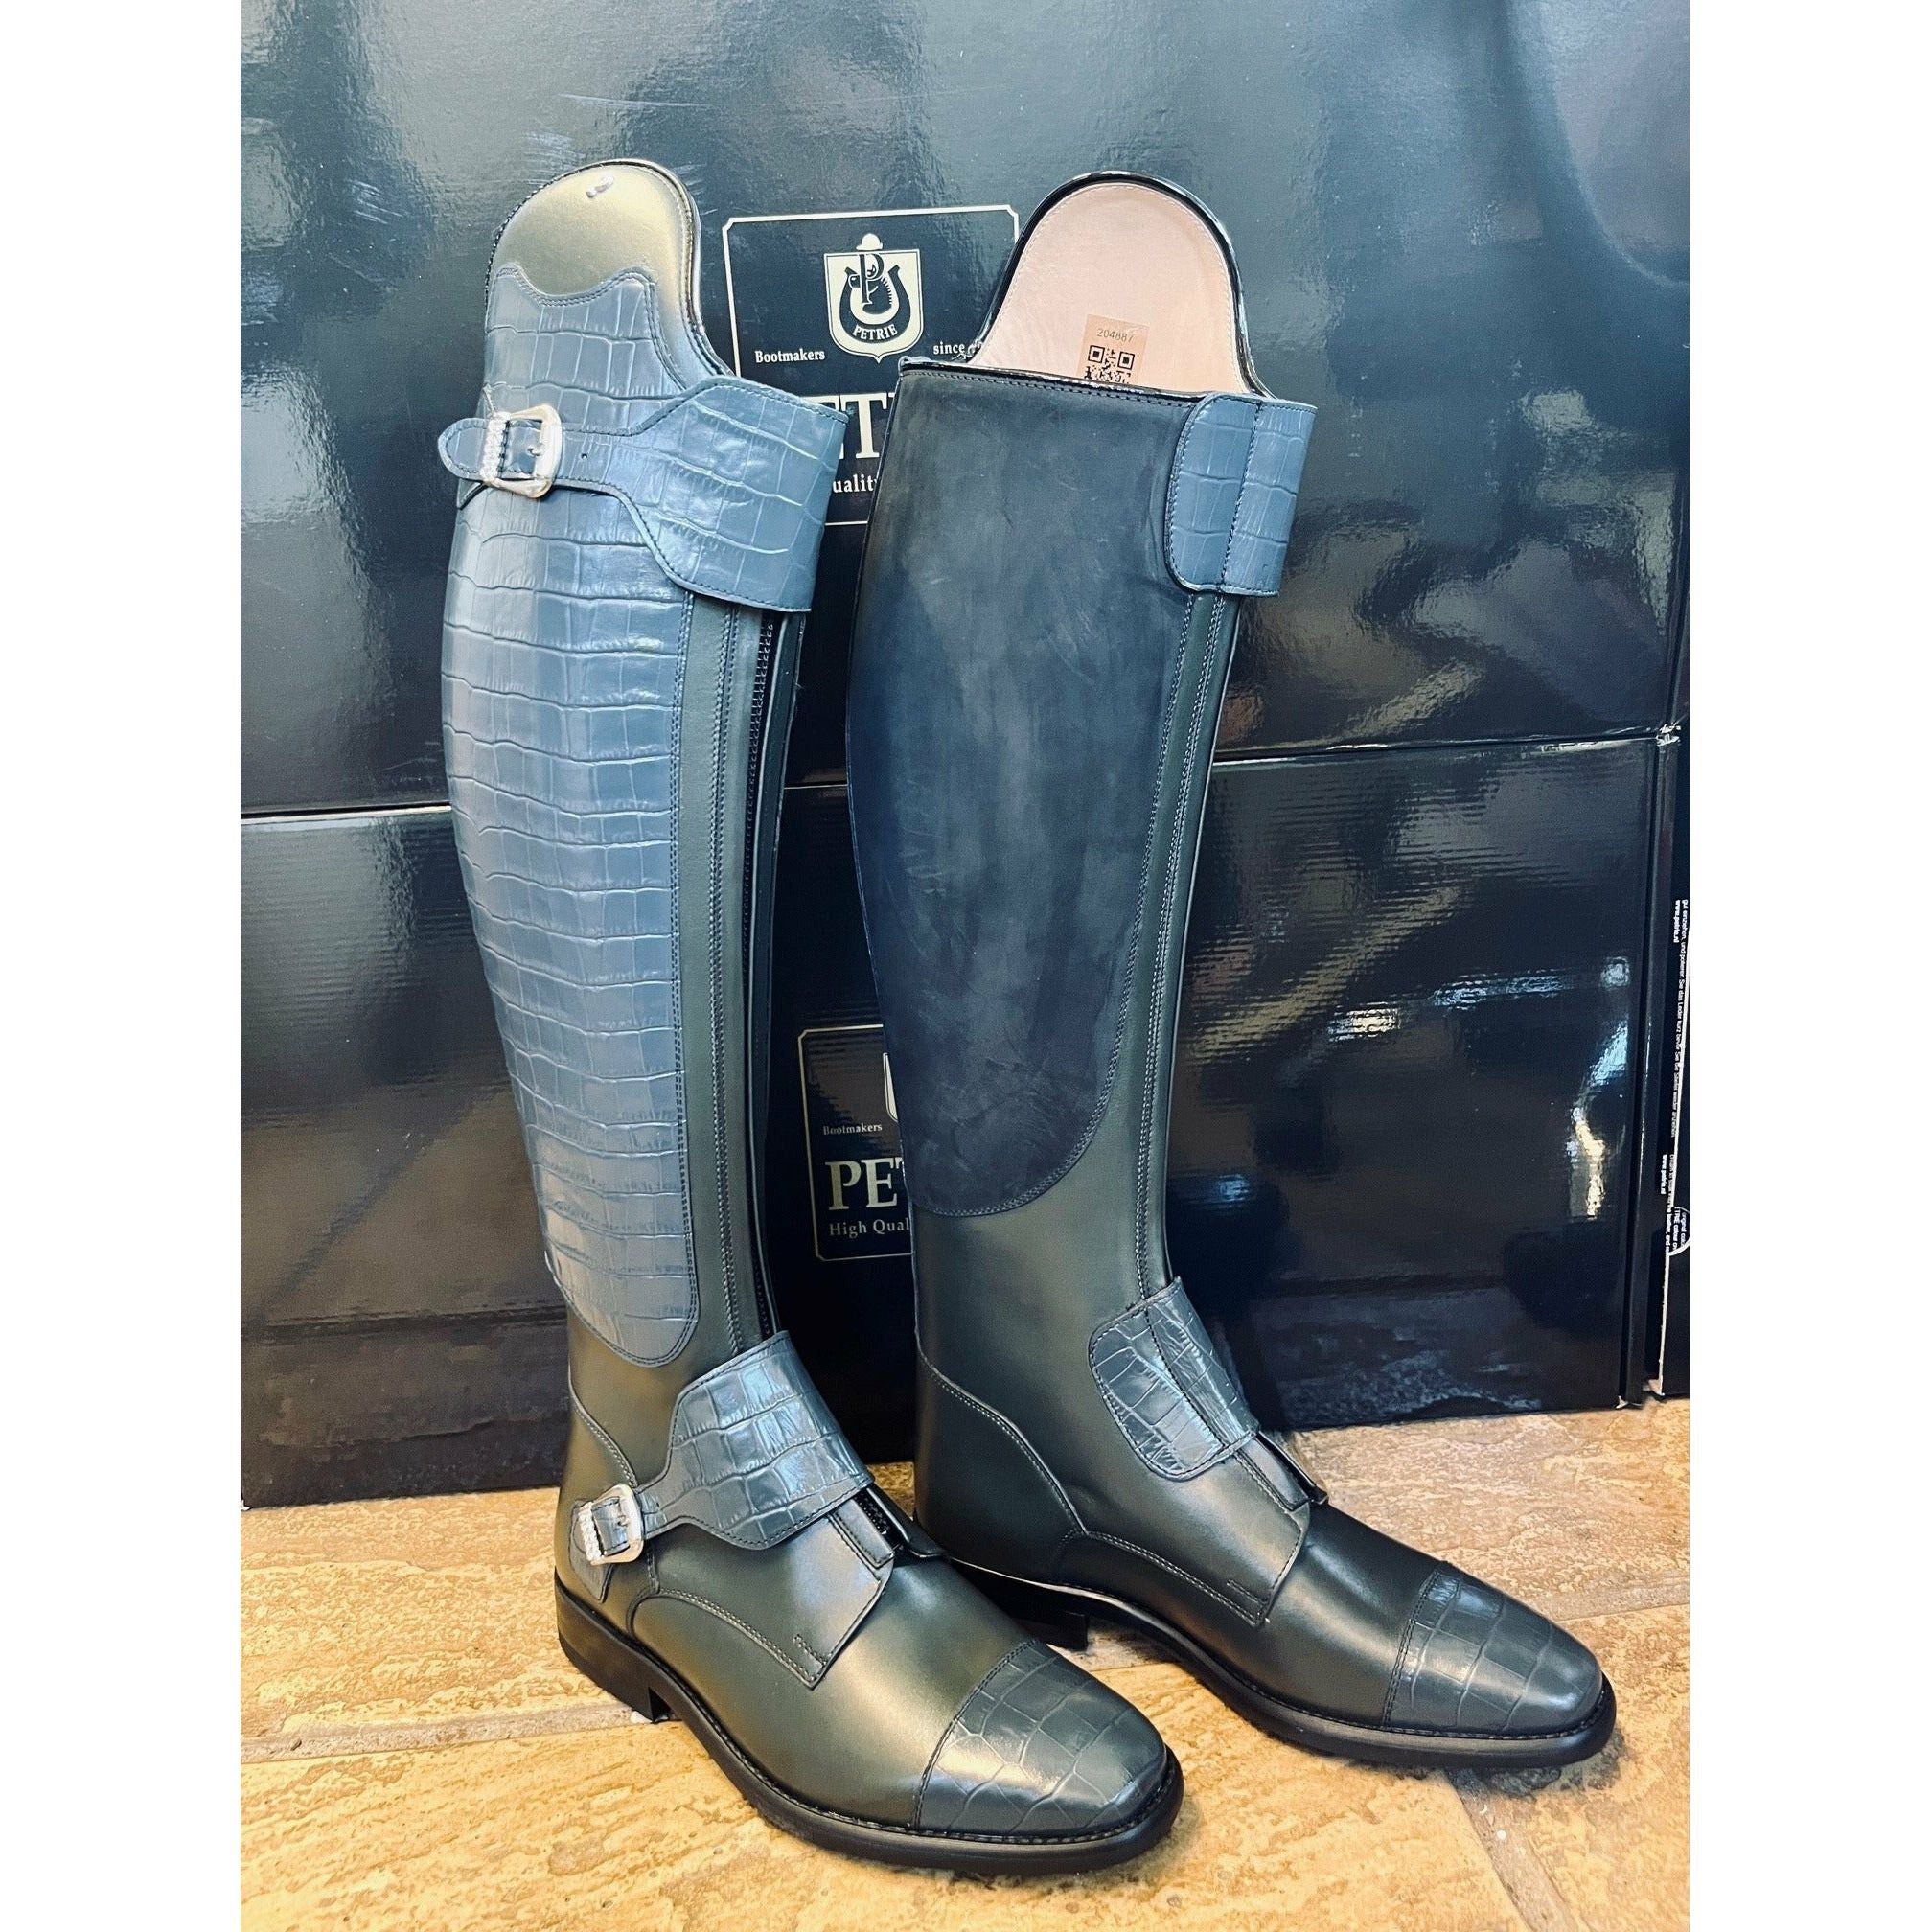 Petrie Rome Boot - Ready to Wear!